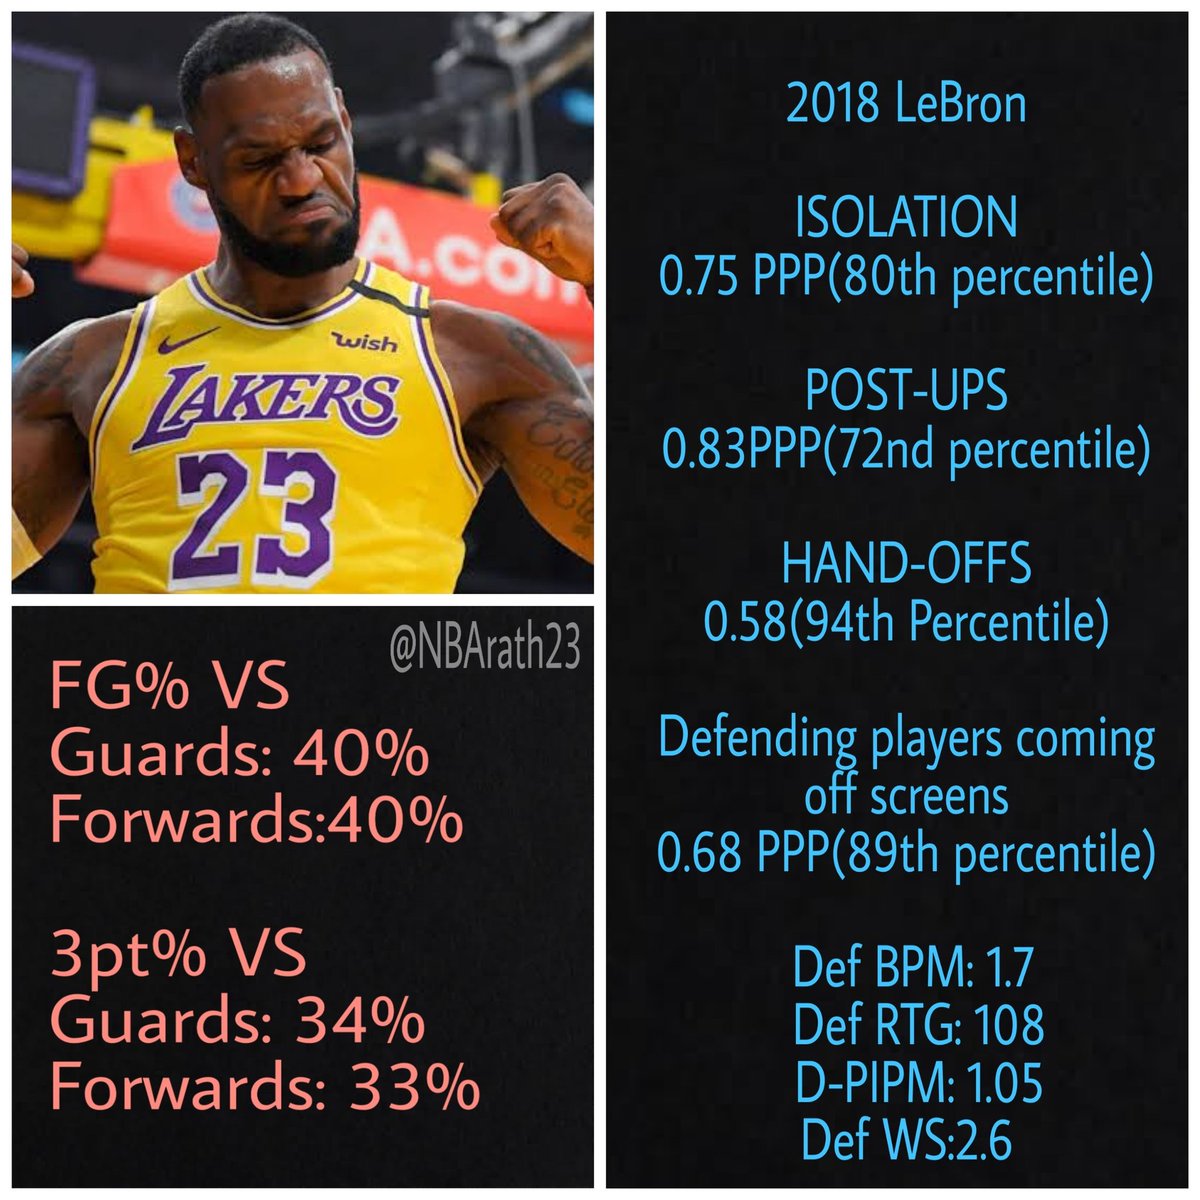 2018 LeBron: He wasn't nearly as bad as the media portrayed him to be. At age 34 this is all you can ask for..Yes he did take a few possessions of but at that age, you can give him a pass I guess. #nba    #nbatwitter  